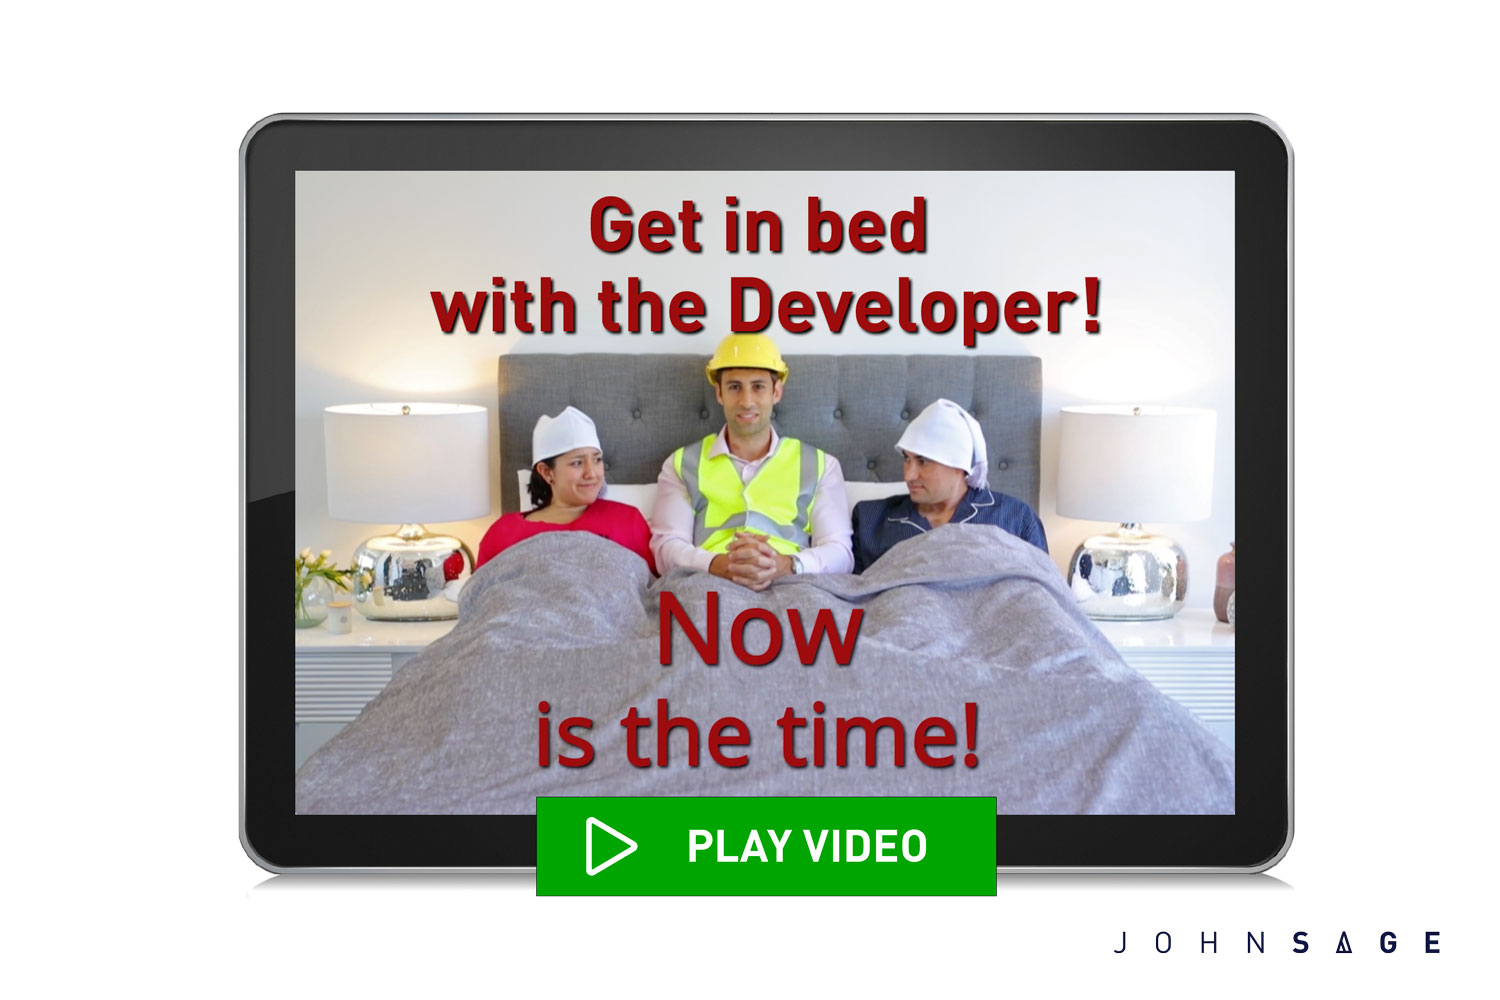 Get in bed with the Developer! Now is the time!